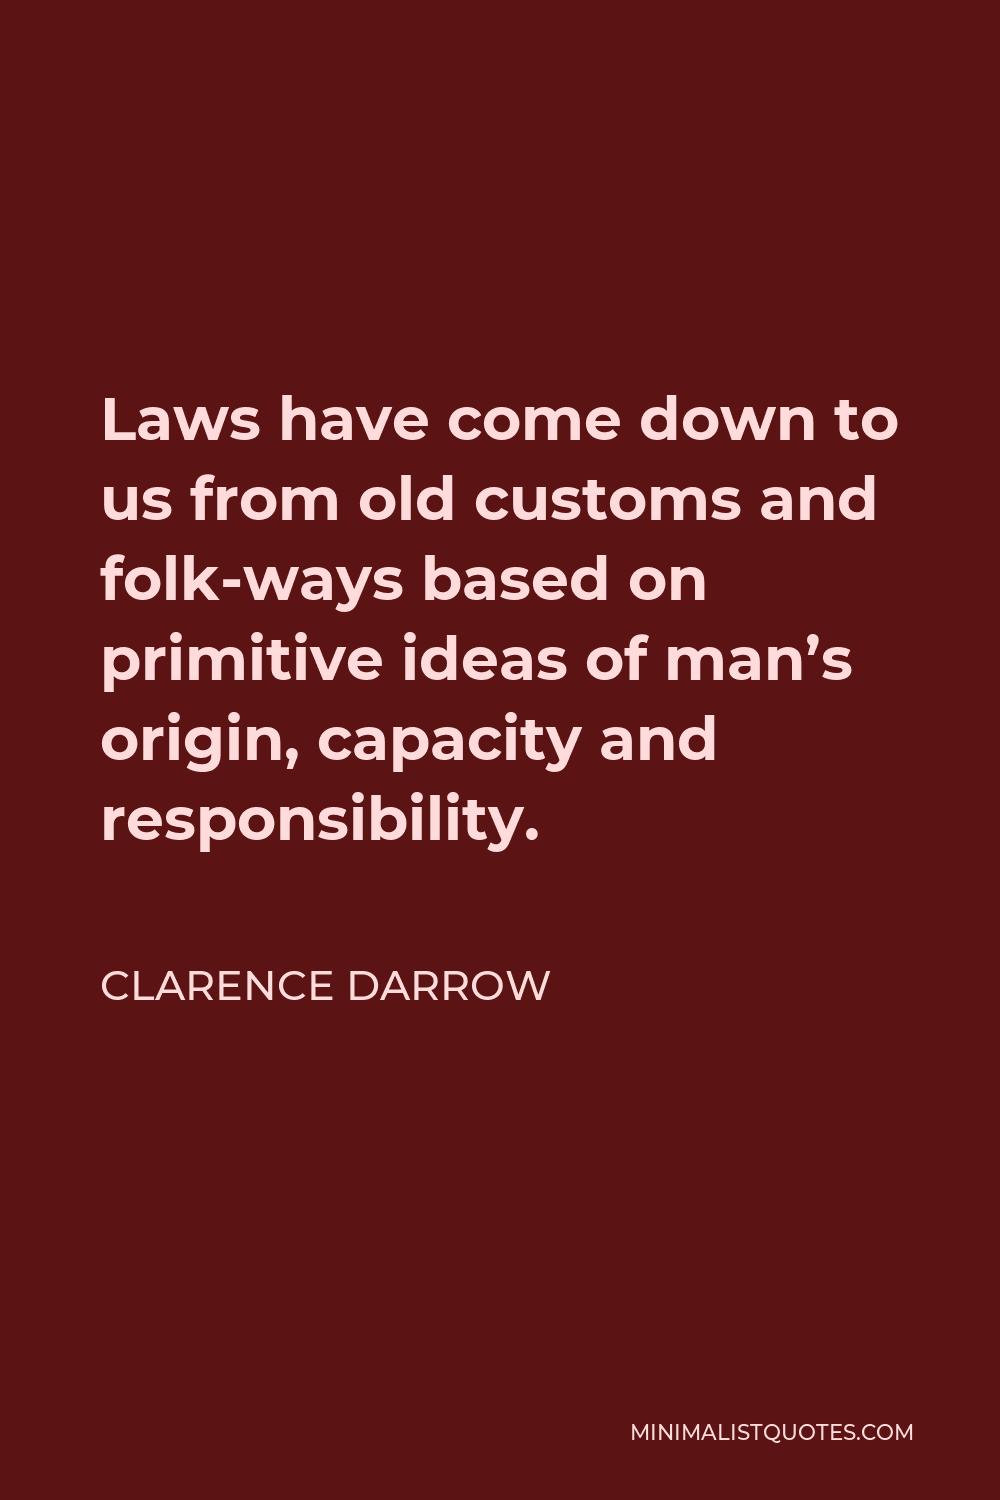 Clarence Darrow Quote - Laws have come down to us from old customs and folk-ways based on primitive ideas of man’s origin, capacity and responsibility.